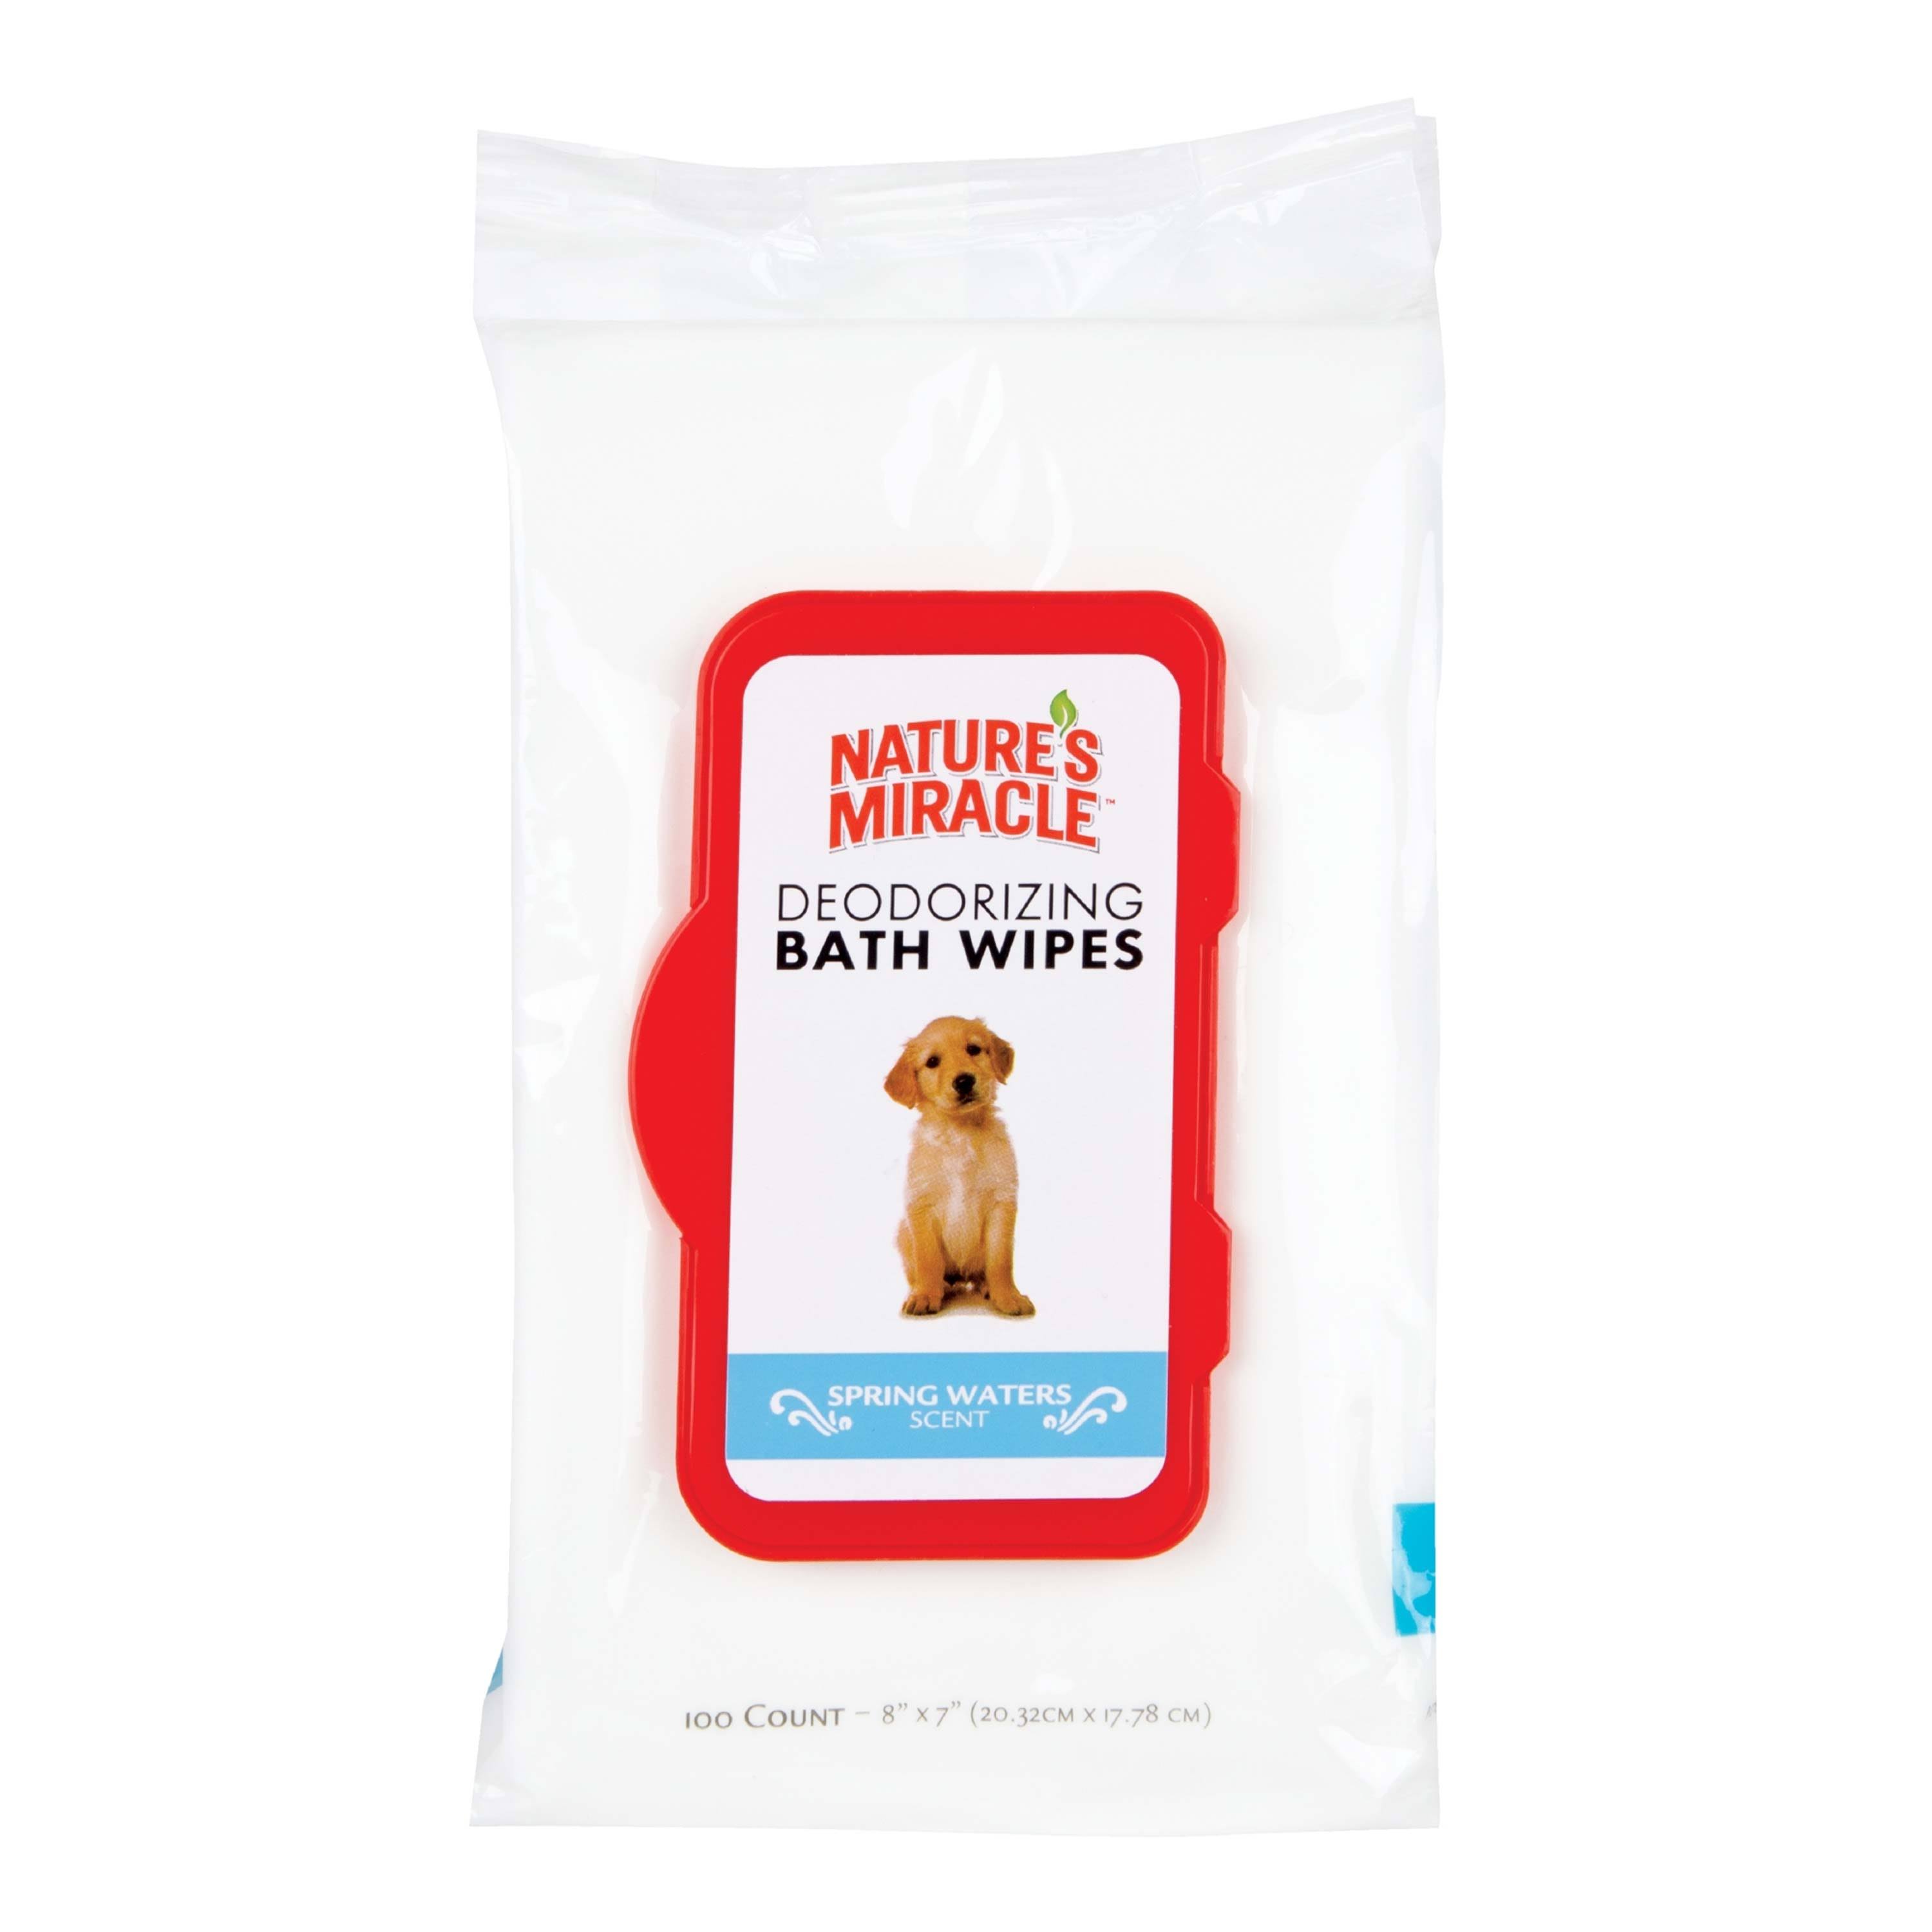 Nature's Miracle Deodorizing Spring Waters Dog Bath Wipes